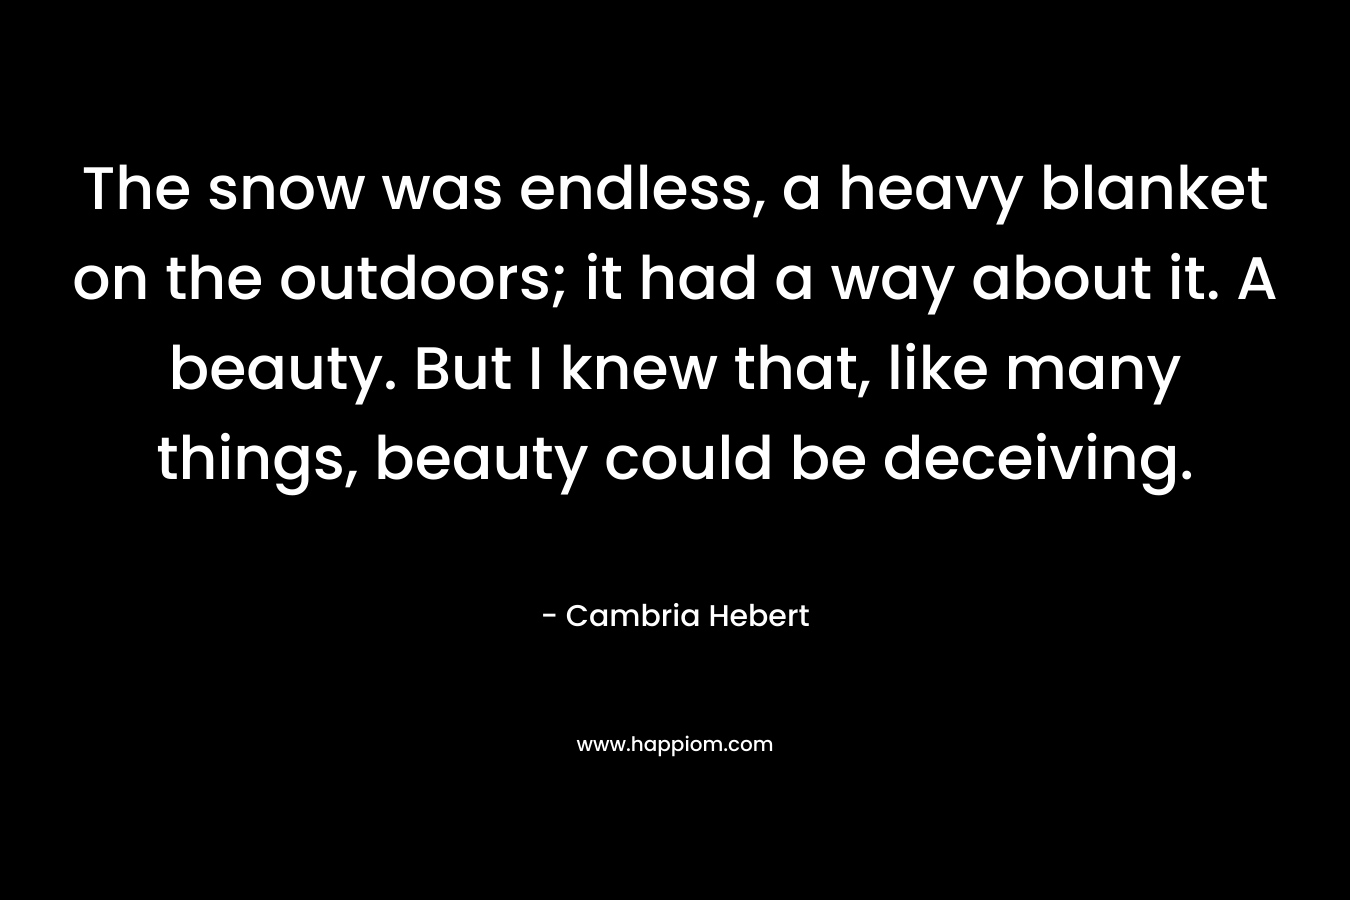 The snow was endless, a heavy blanket on the outdoors; it had a way about it. A beauty. But I knew that, like many things, beauty could be deceiving.